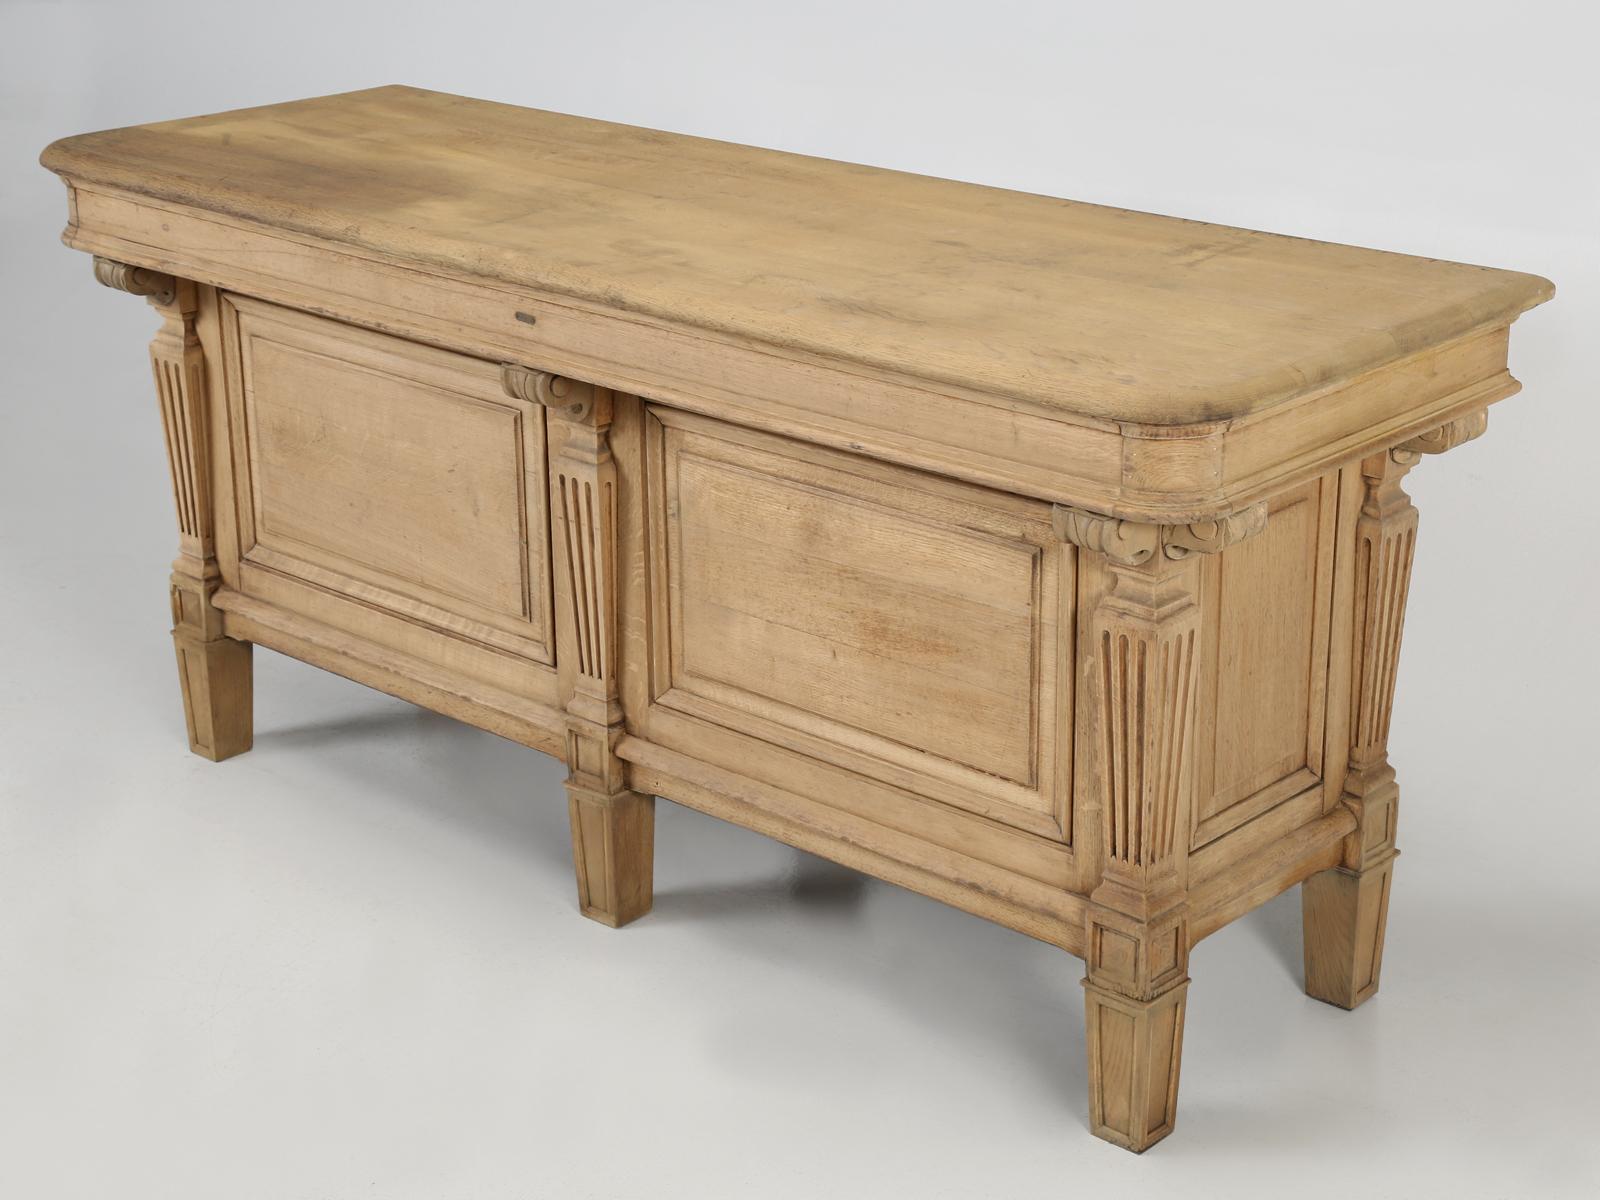 This antique French store fixture from the early 1900s, would make absolutely the most perfect kitchen island, from both an aesthetic and functional point of view. We carefully rebuilt the entire structure, while not disturbing the natural wear and